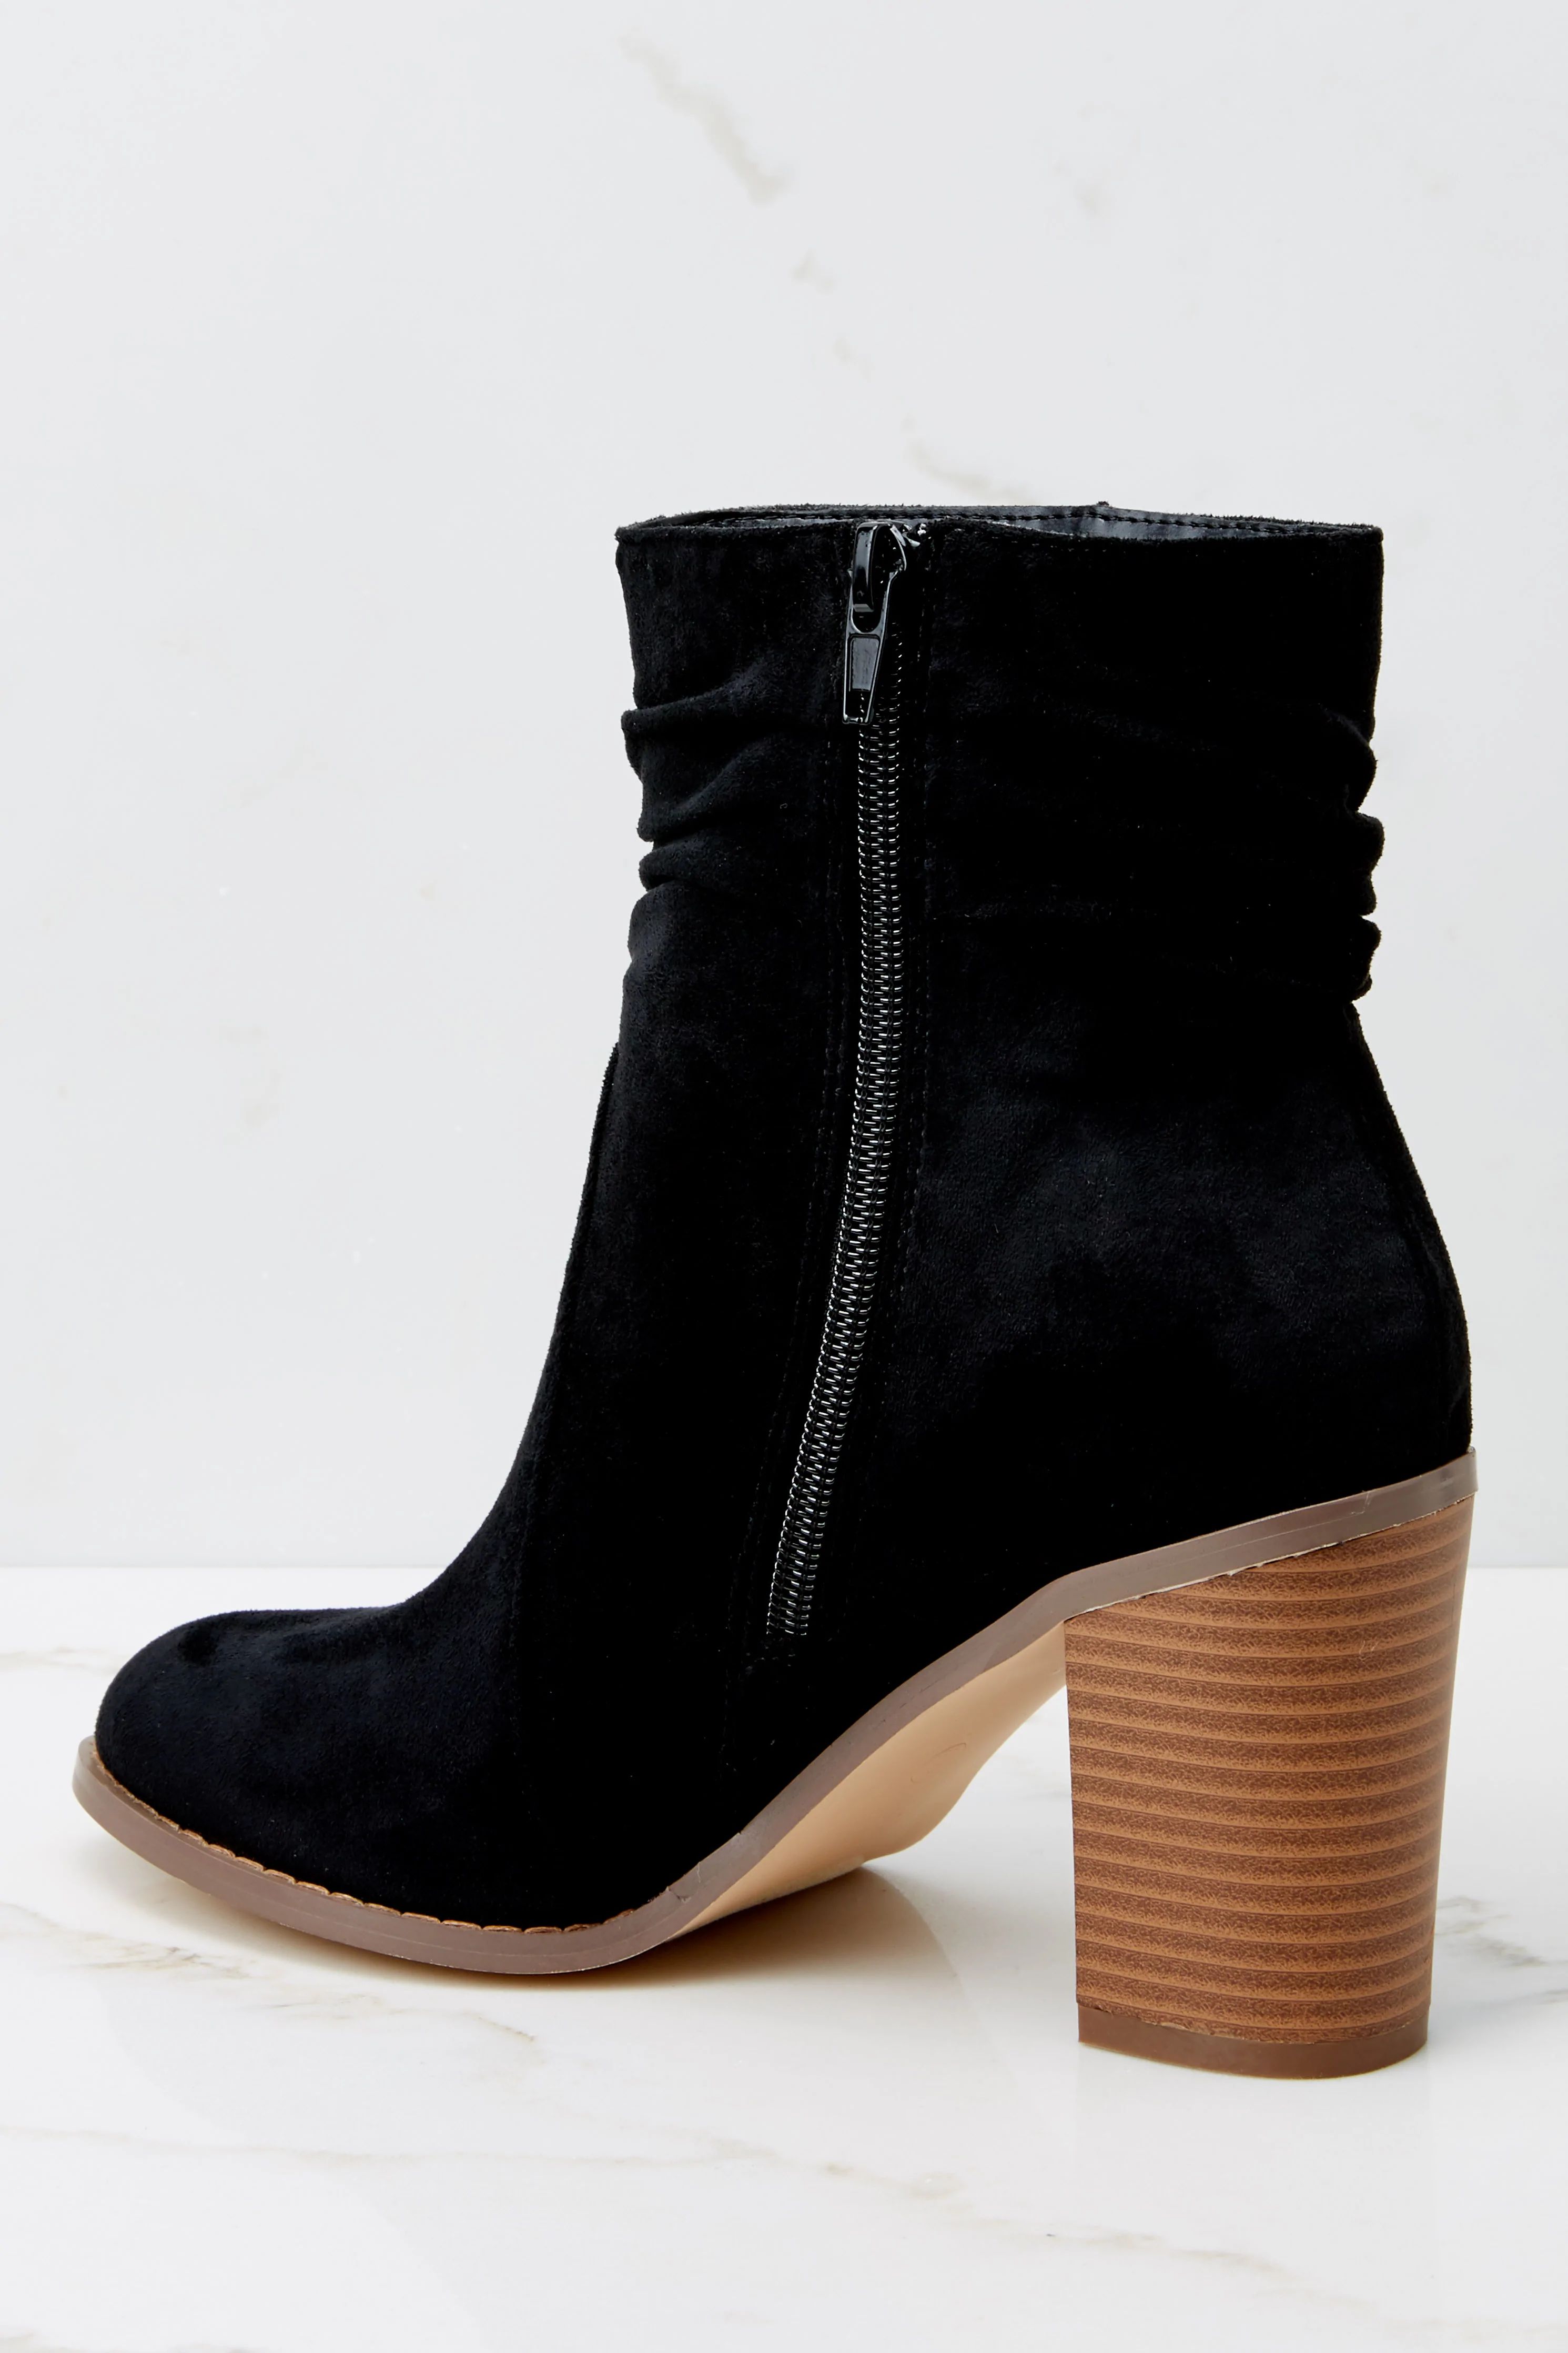 Just In Time Black Ankle Booties | Red Dress 